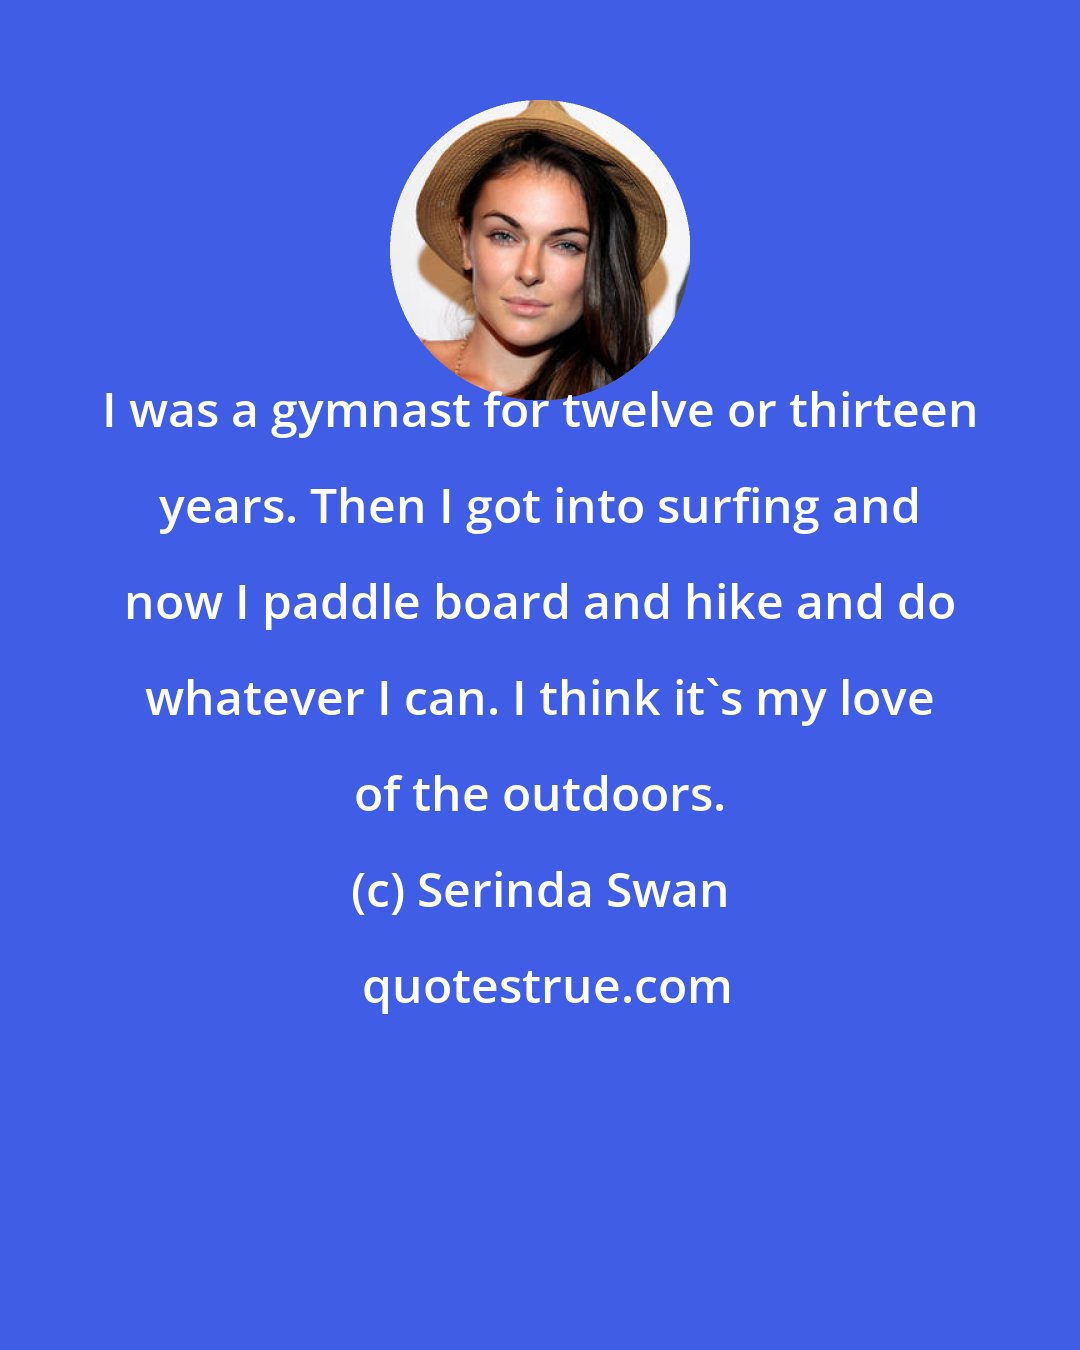 Serinda Swan: I was a gymnast for twelve or thirteen years. Then I got into surfing and now I paddle board and hike and do whatever I can. I think it's my love of the outdoors.